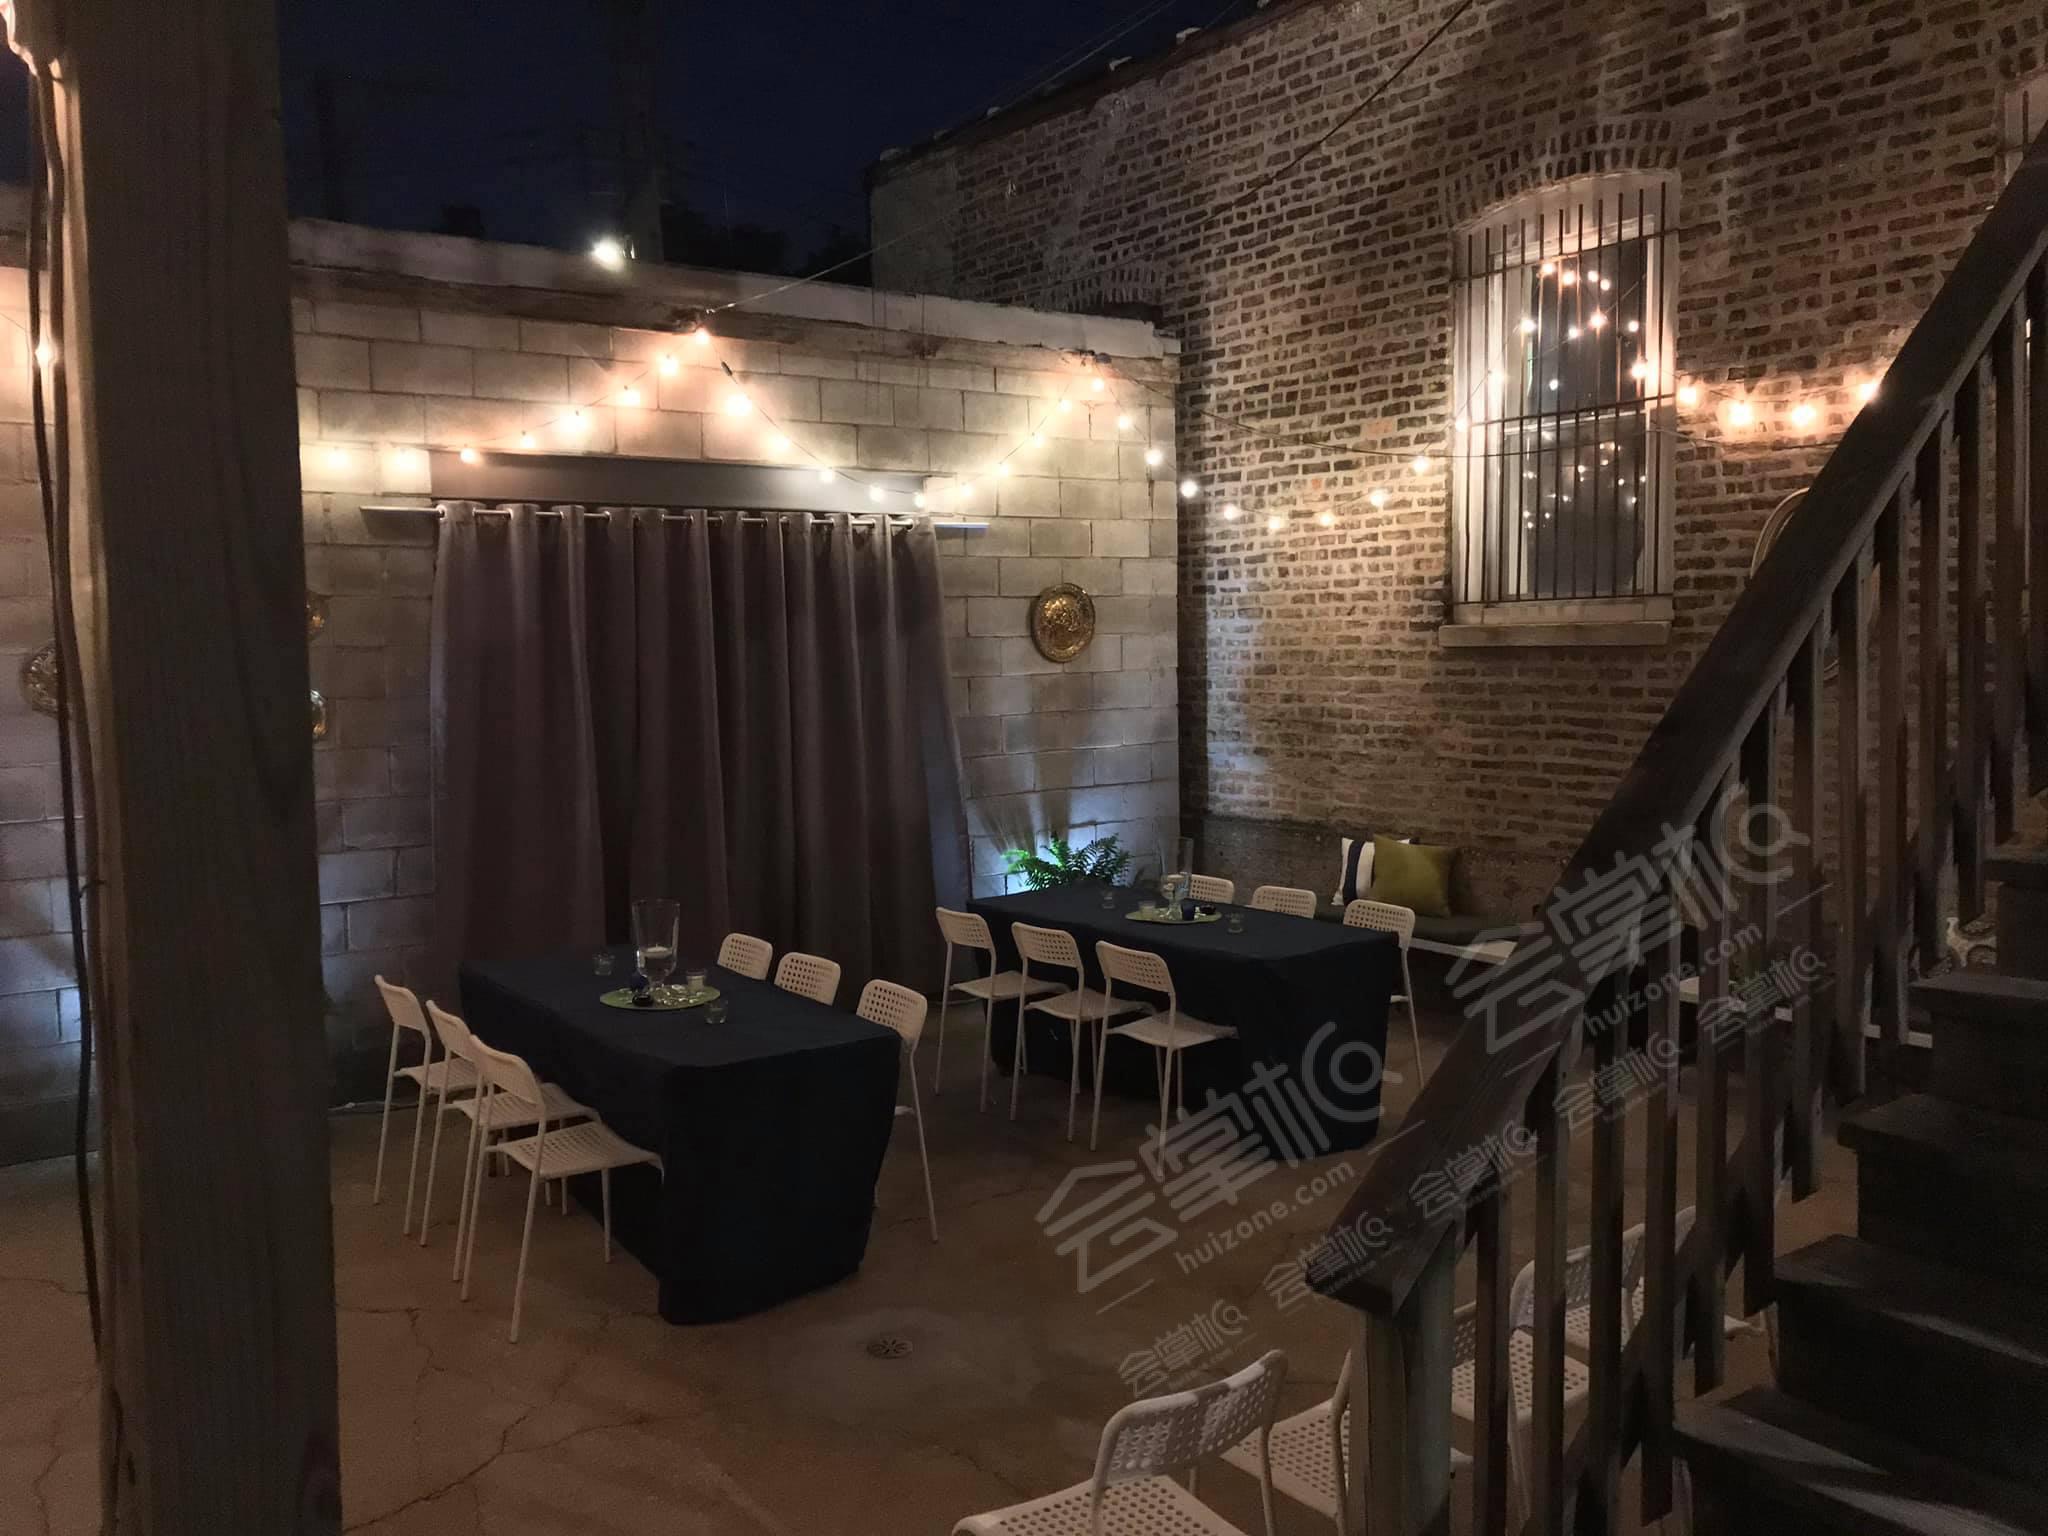 Open Air Patio Seating for 16, newly renovated kitchen & bathroom